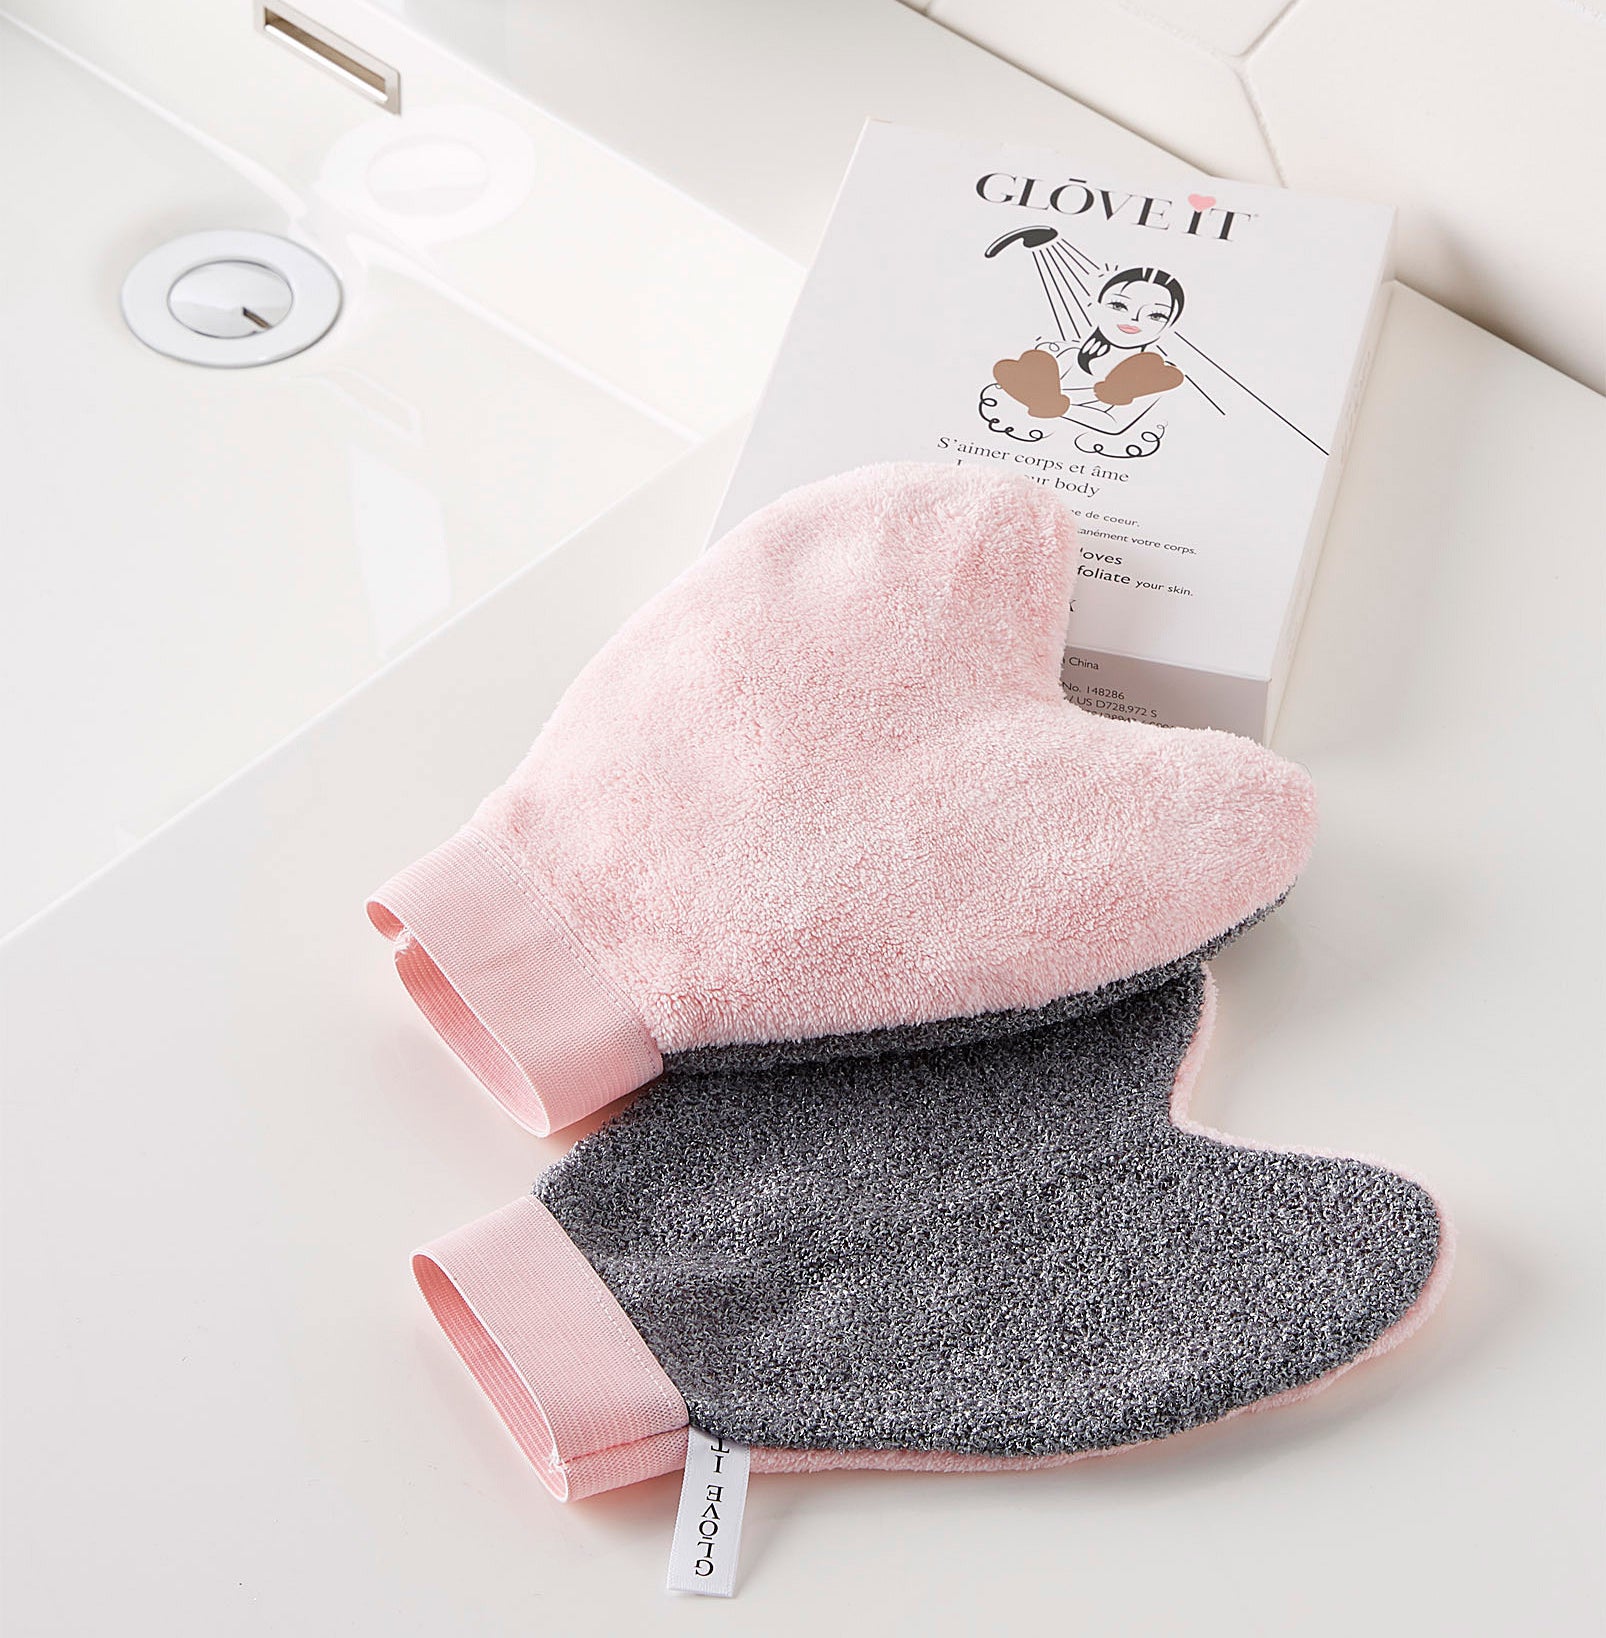 A pair of spa gloves on a bathroom counter